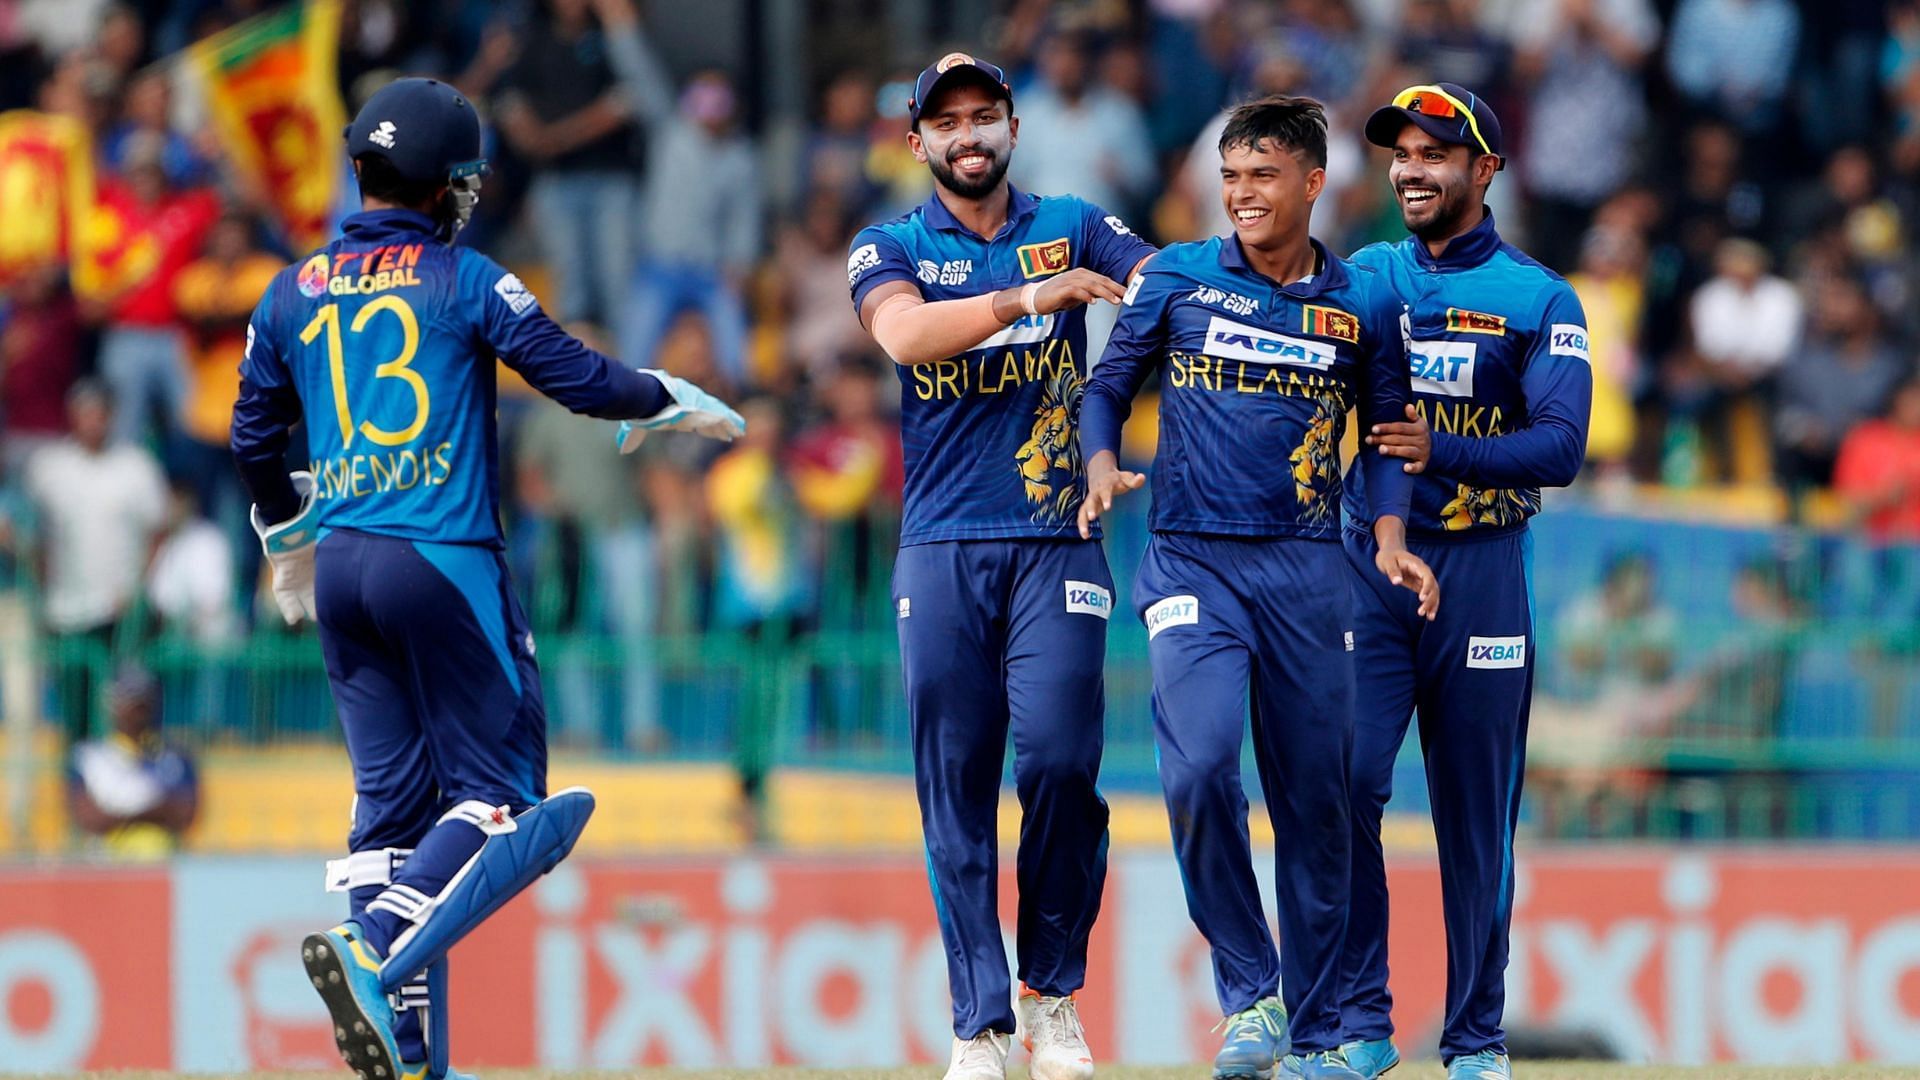 Dunith Wellalage being congratulated by his teammates after he took a wicket during the Supeer4 match against India. 